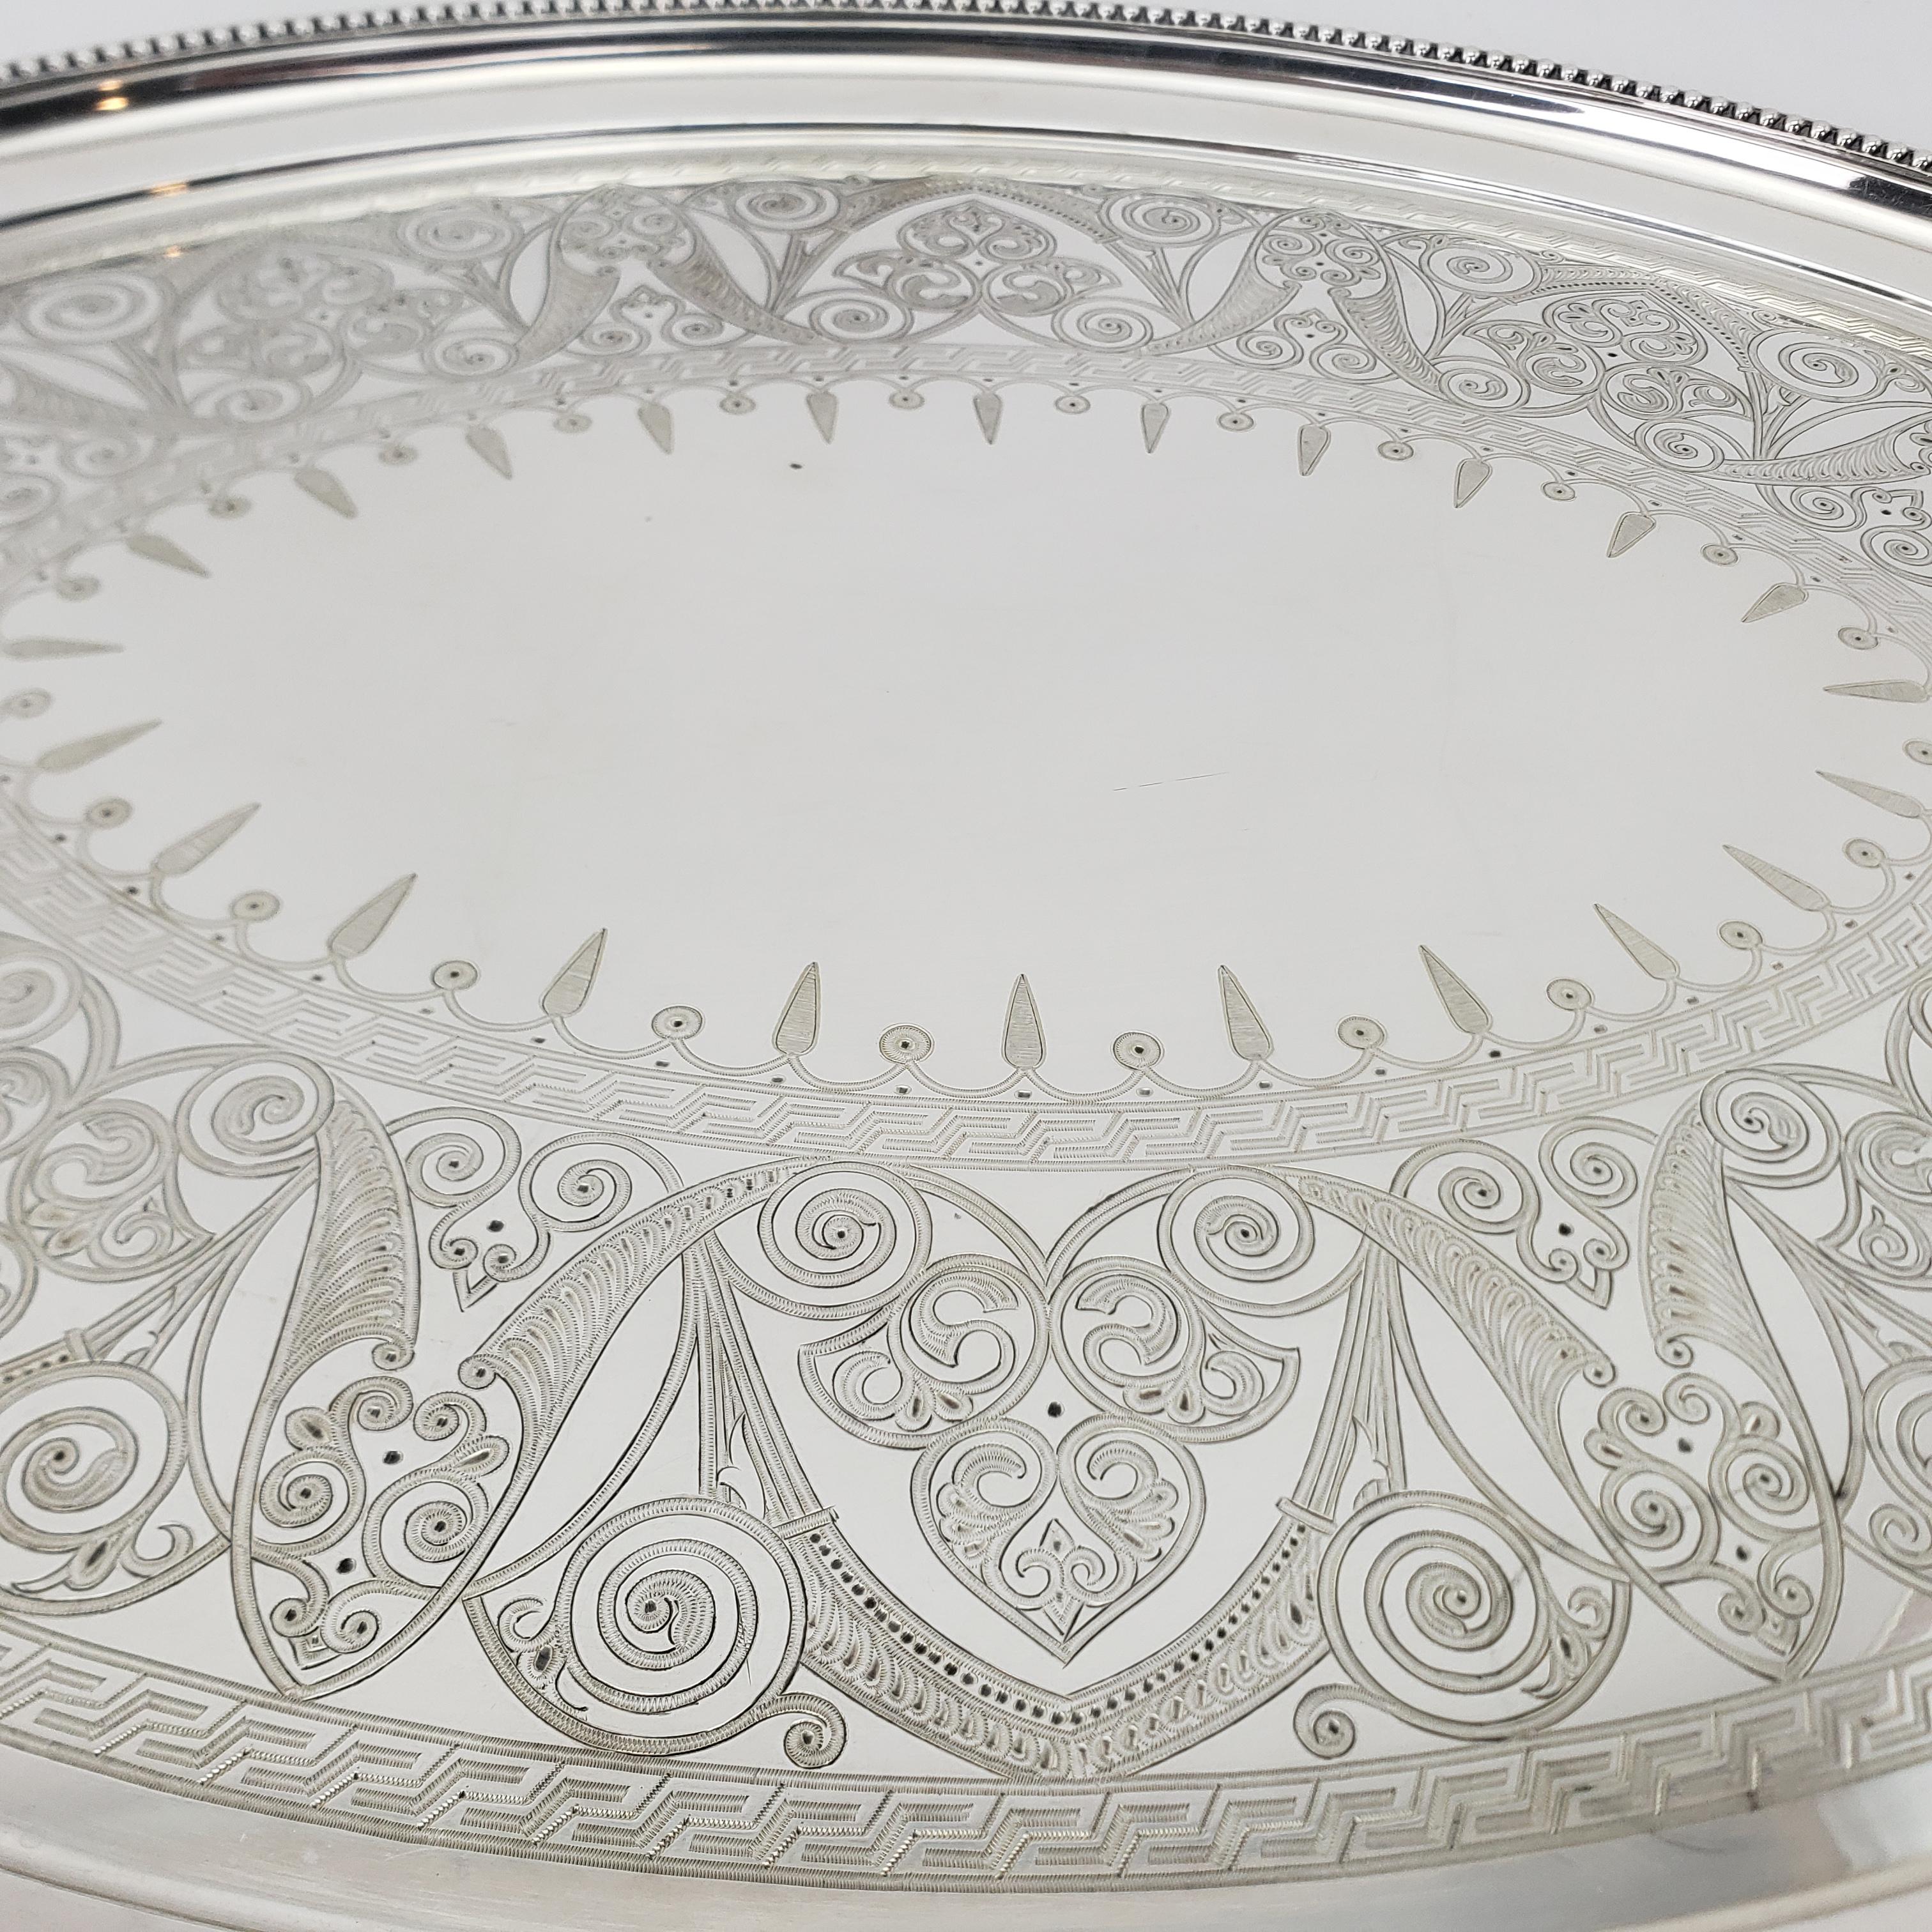 Large Antique Elkington Oval Silver Plated Serving Tray with Floral Engraving For Sale 4